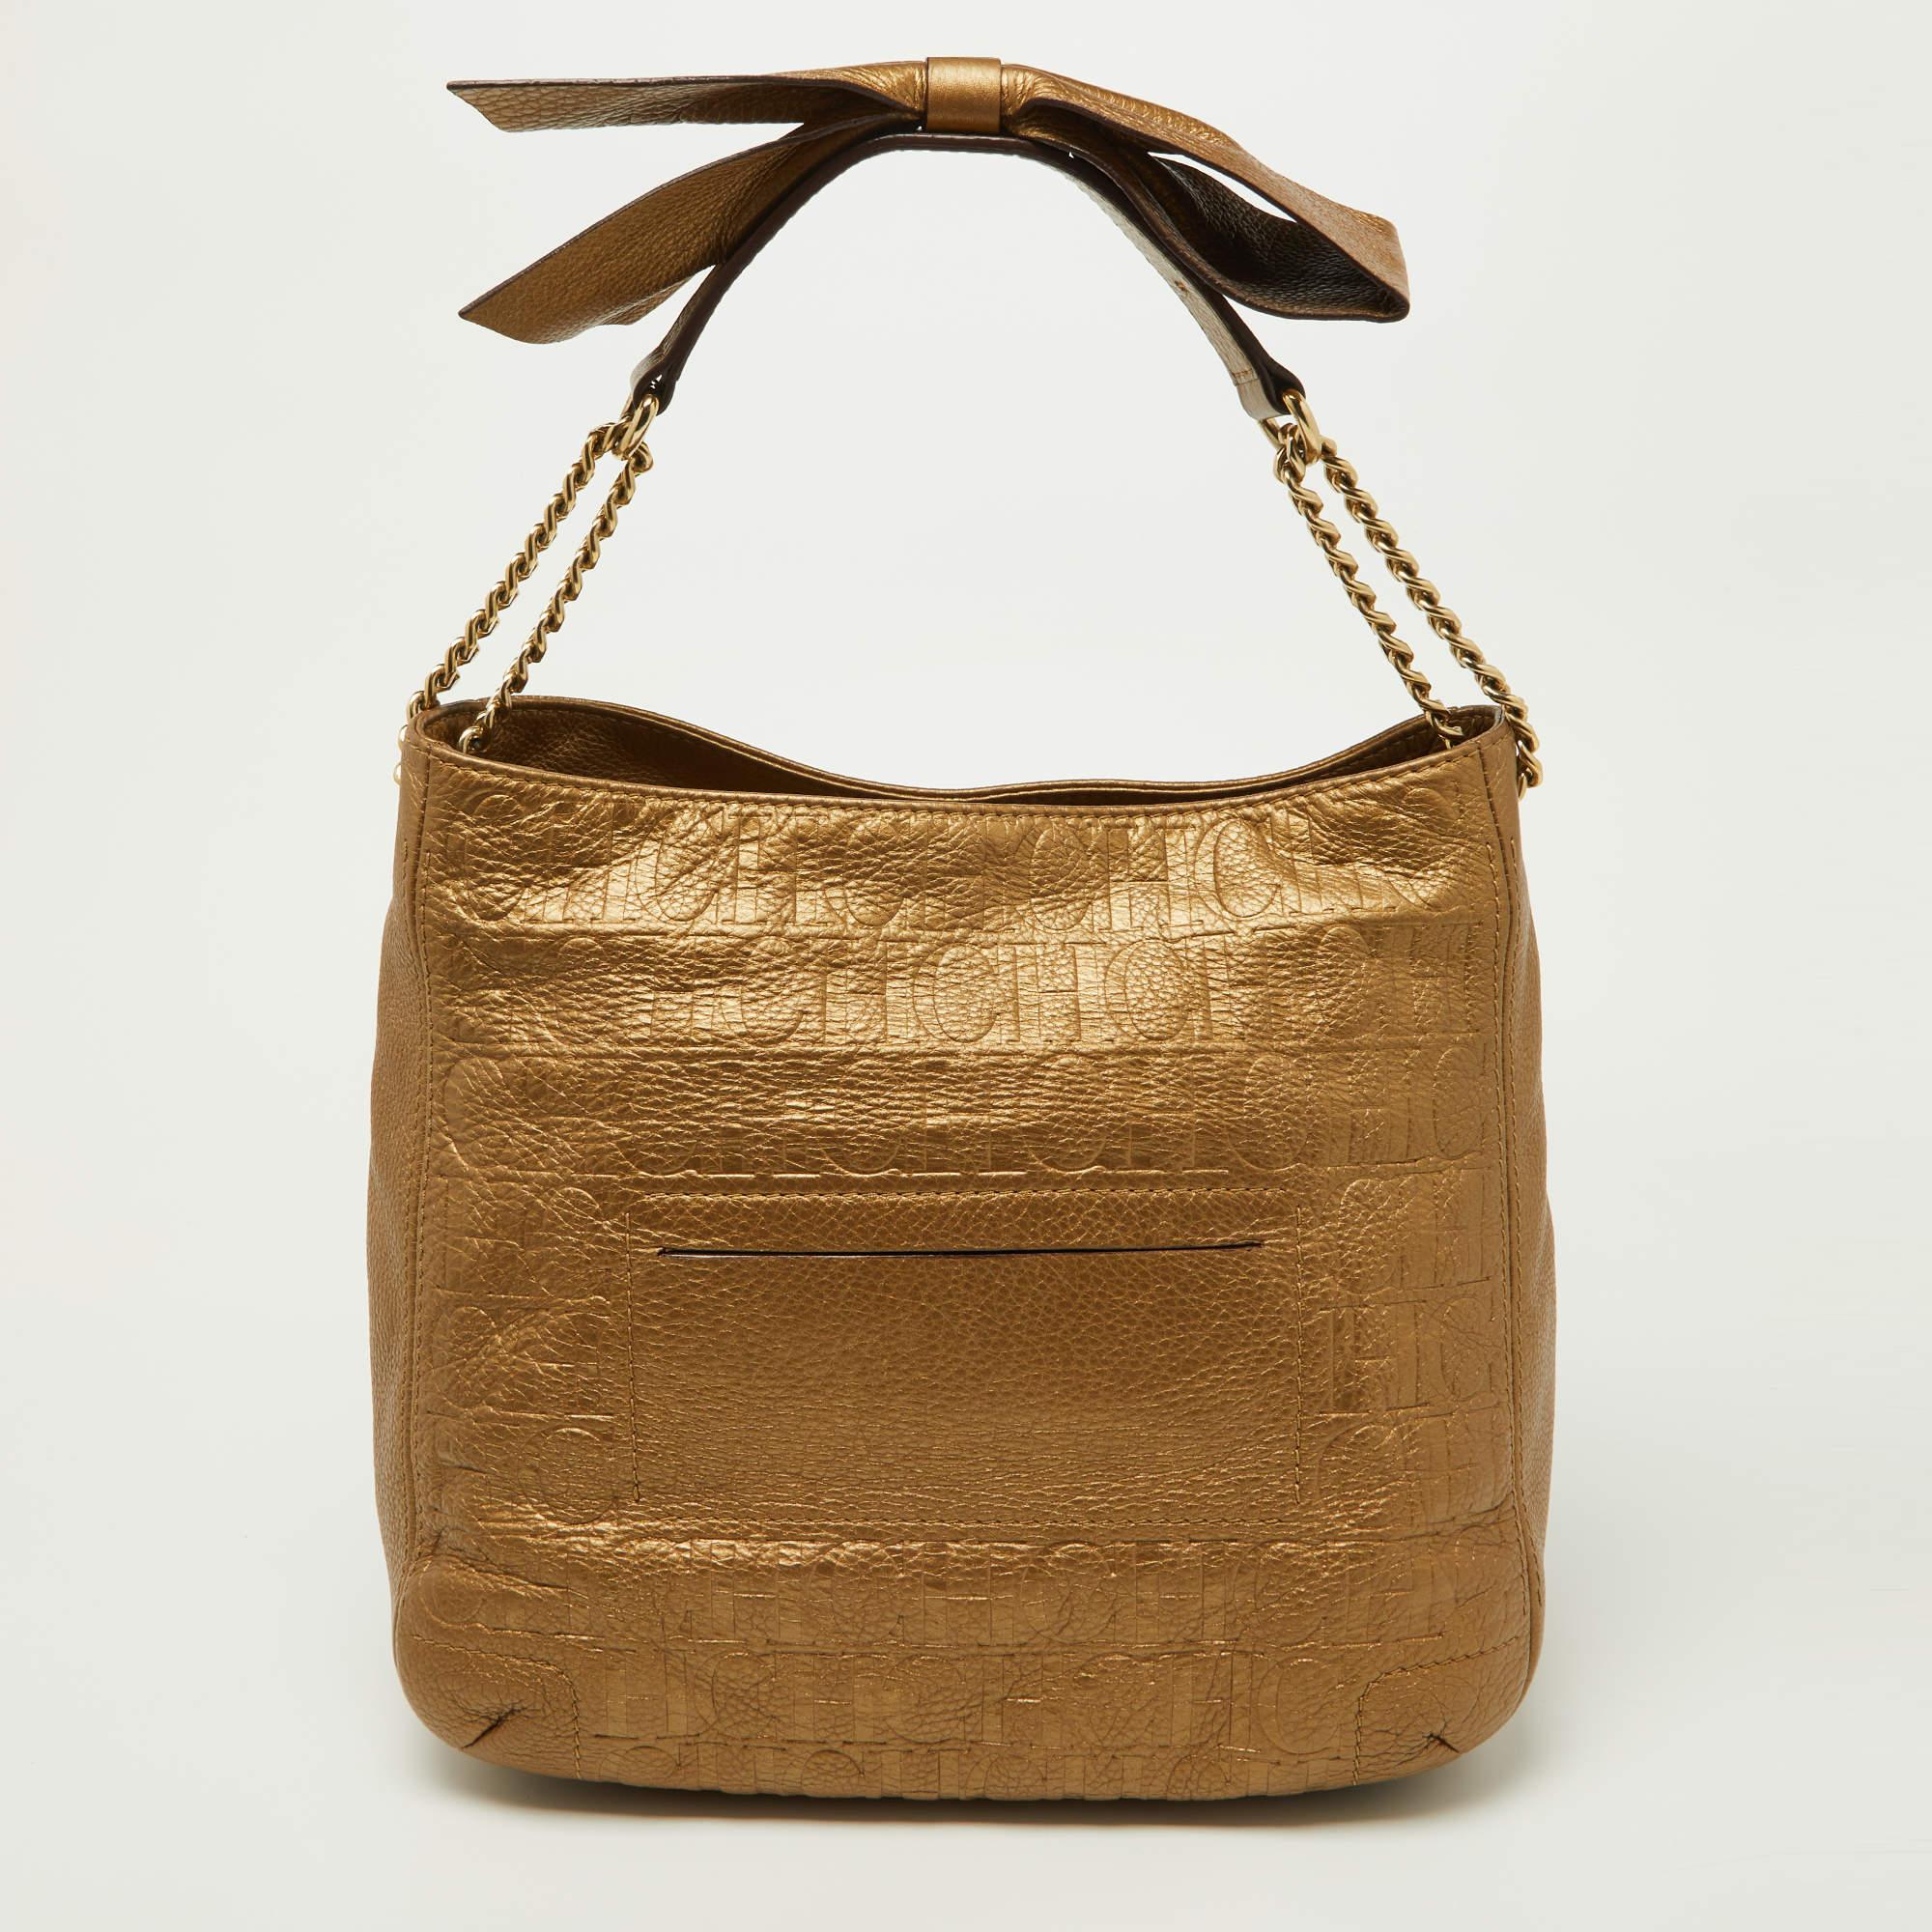 Created from gold embossed leather, this CH Carolina Herrera hobo works well as an everyday accessory. It makes for a stylish carry option with its bow-detailed chain handle at the top, and it flaunts gold-tone hardware. Lined with fabric, it is